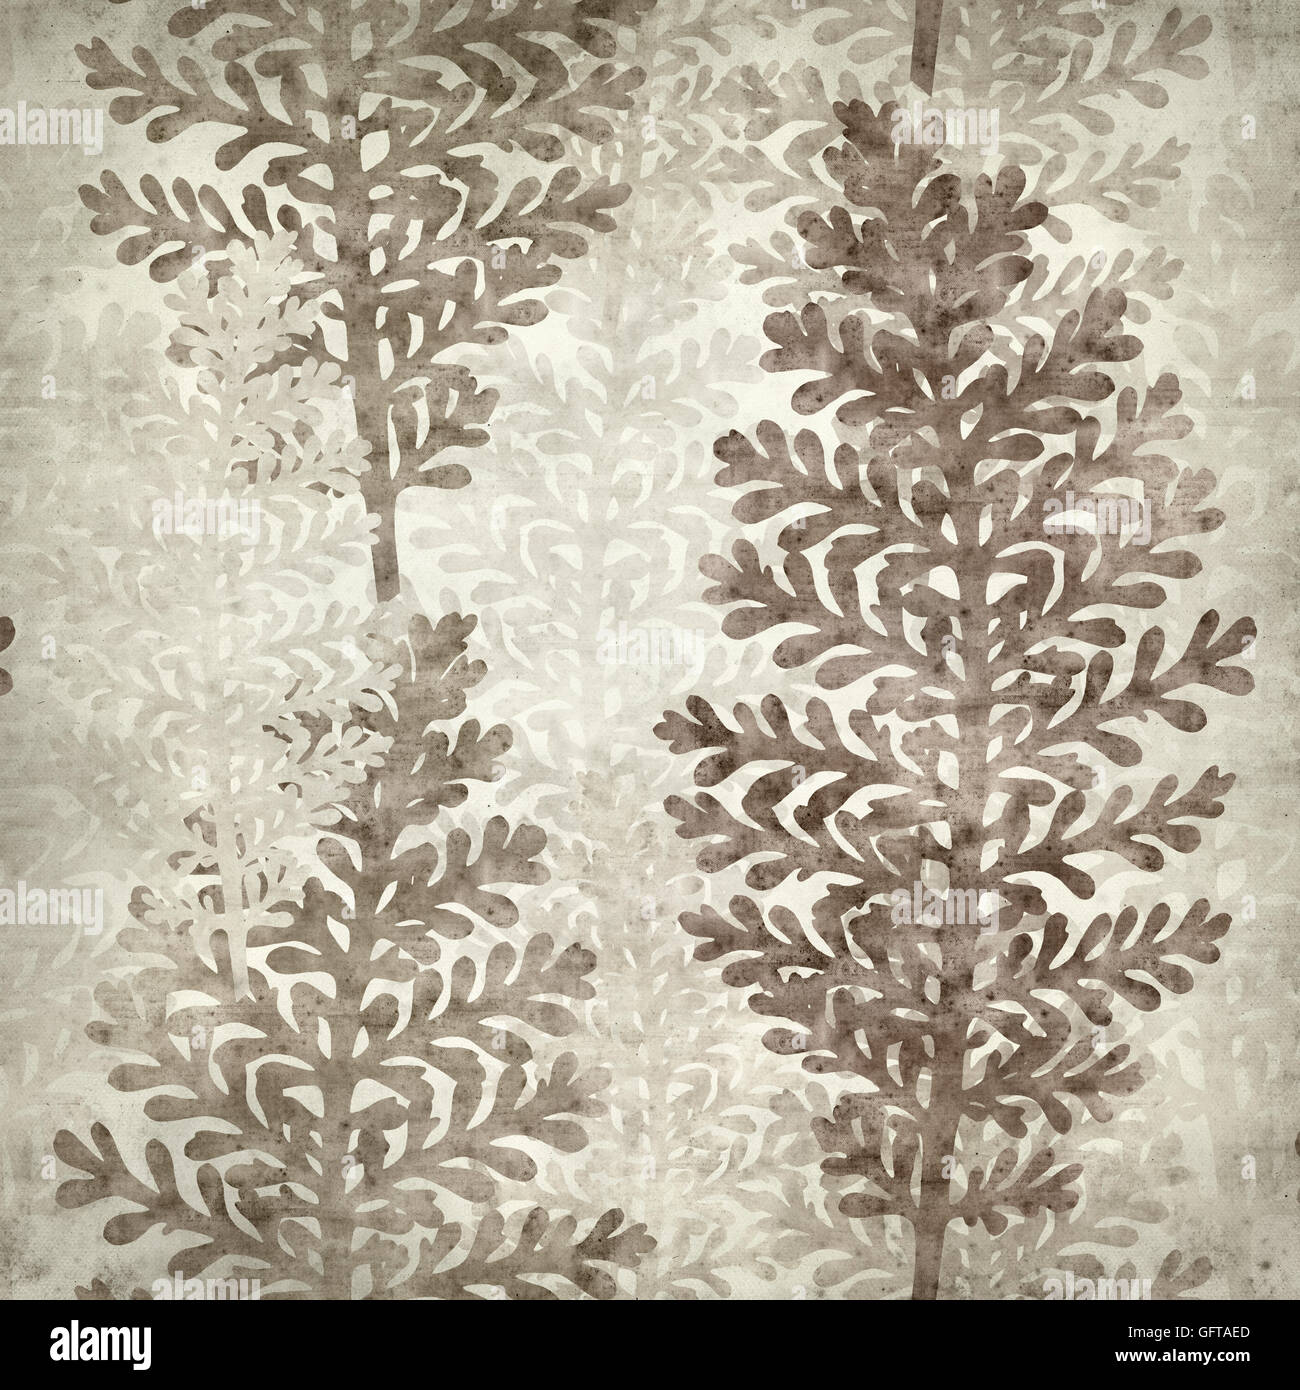 textured old paper background with leaves of silver lace plant Stock Photo